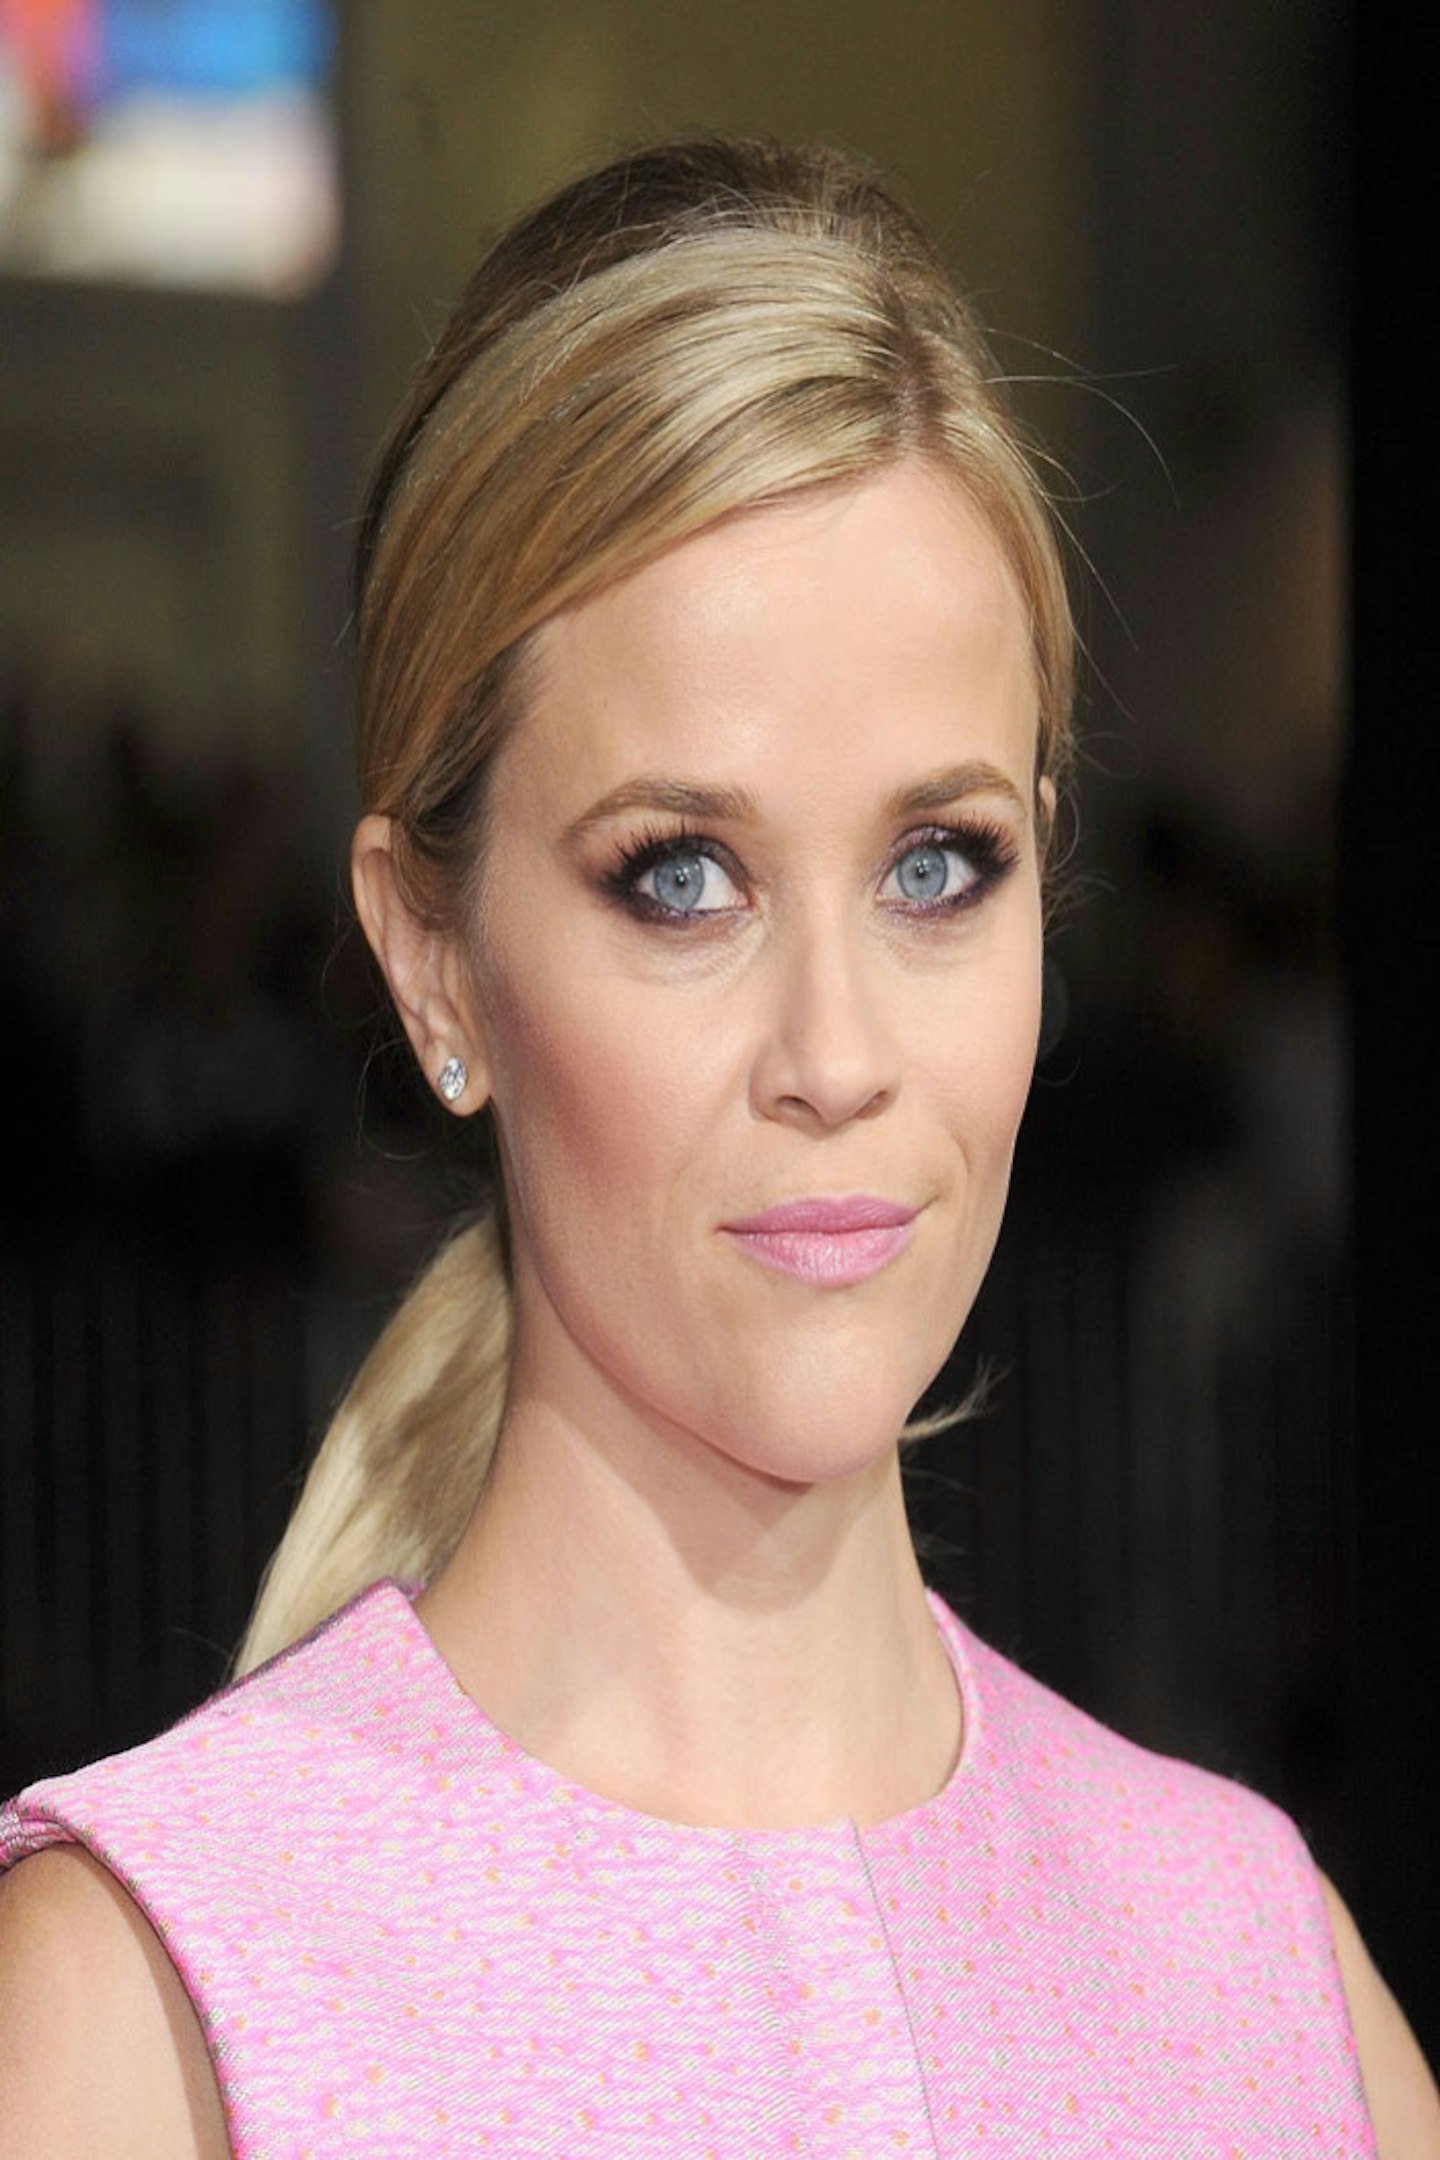 Reese Witherspoon via Getty